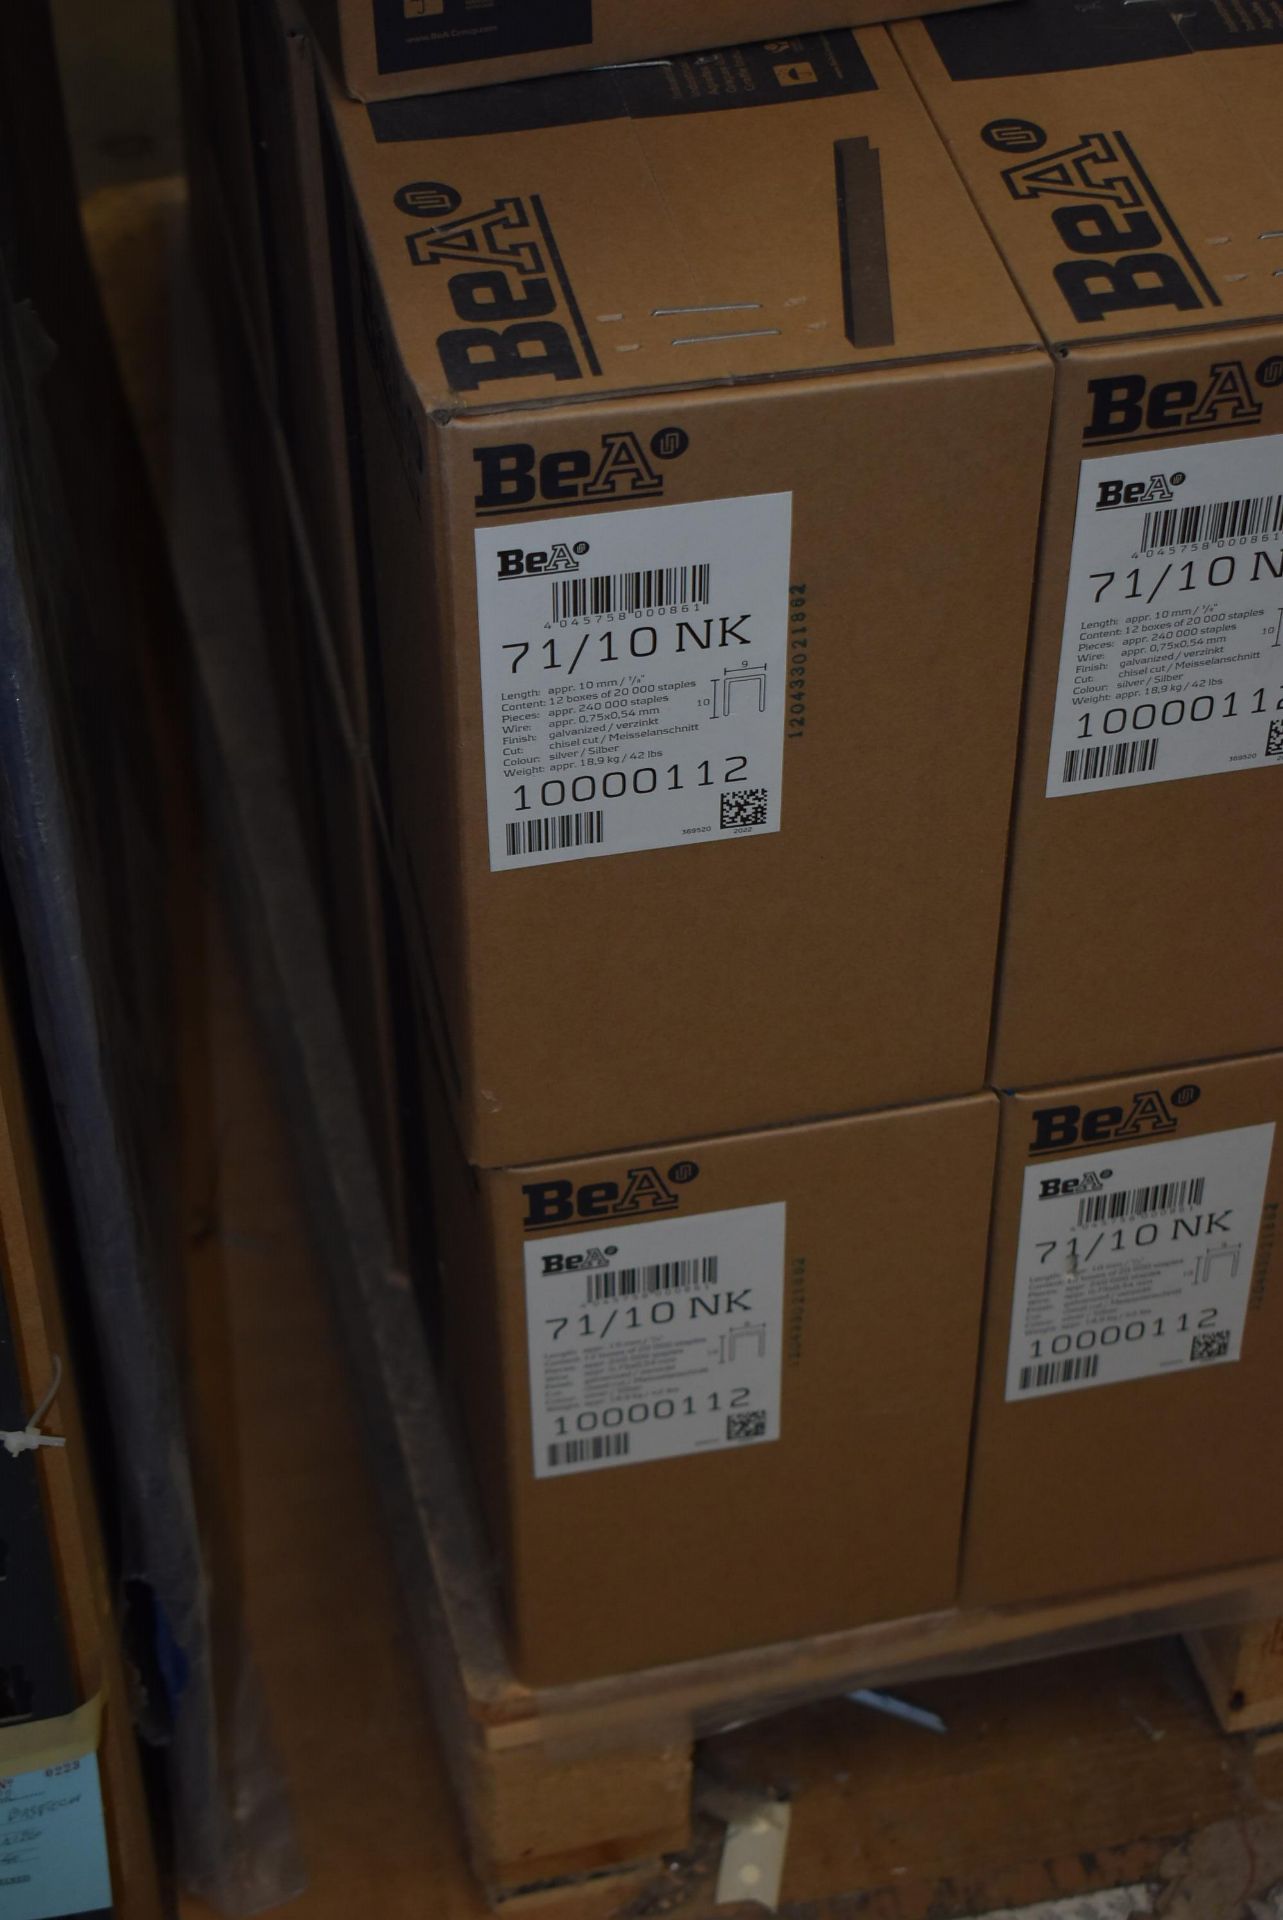 *Two Boxes of ~240000 BEA 71/MK Staples